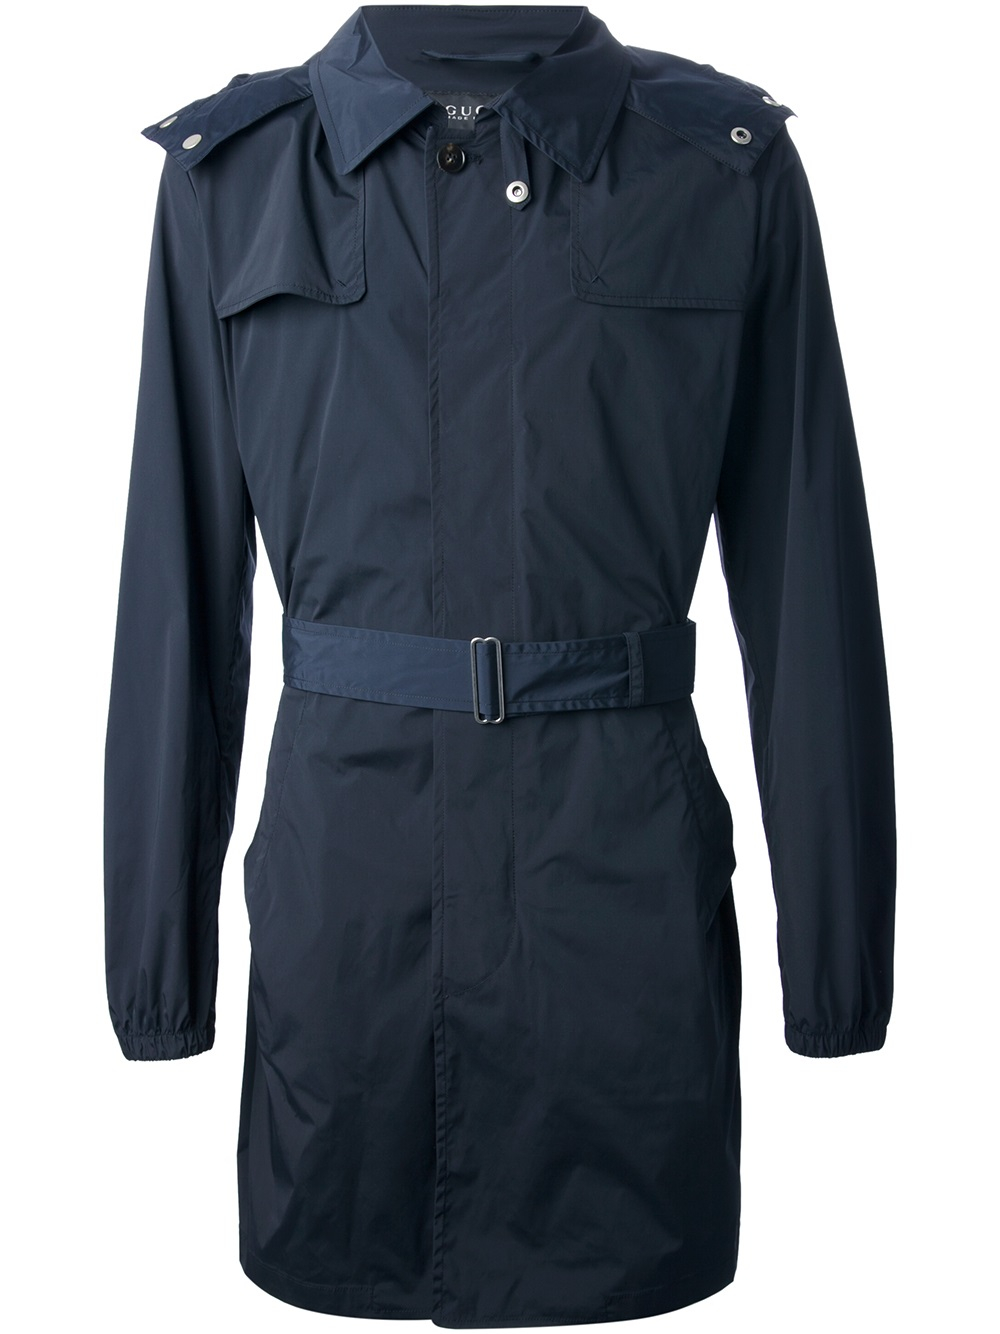 Gucci Belted Raincoat in Blue for Men - Lyst